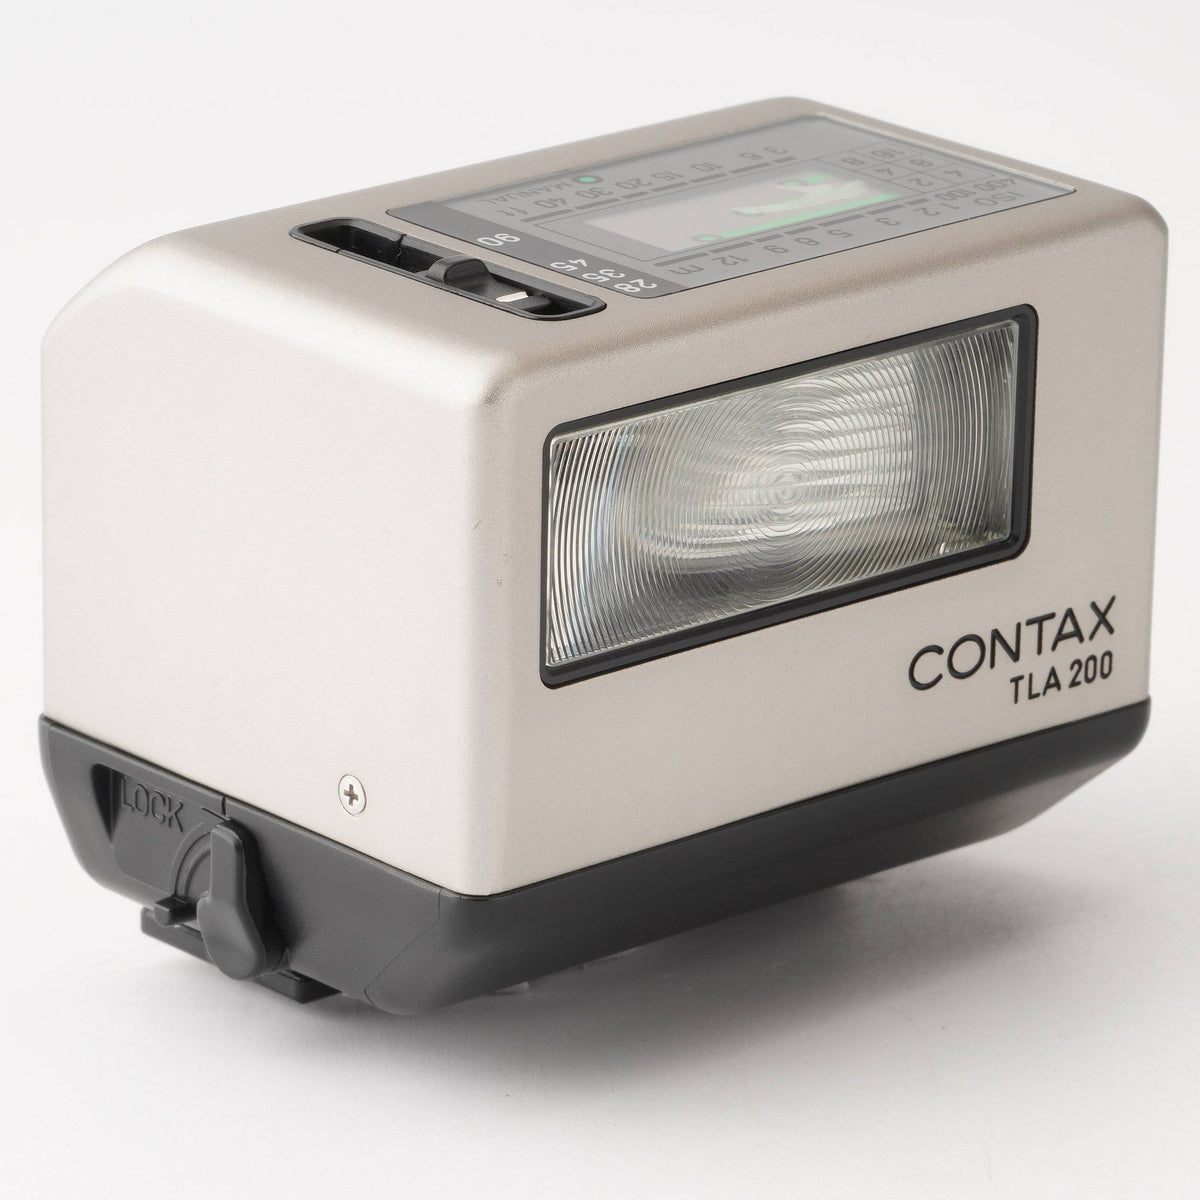 Contax TLA 200 Shoe Mount Flash for Contax G1 G2